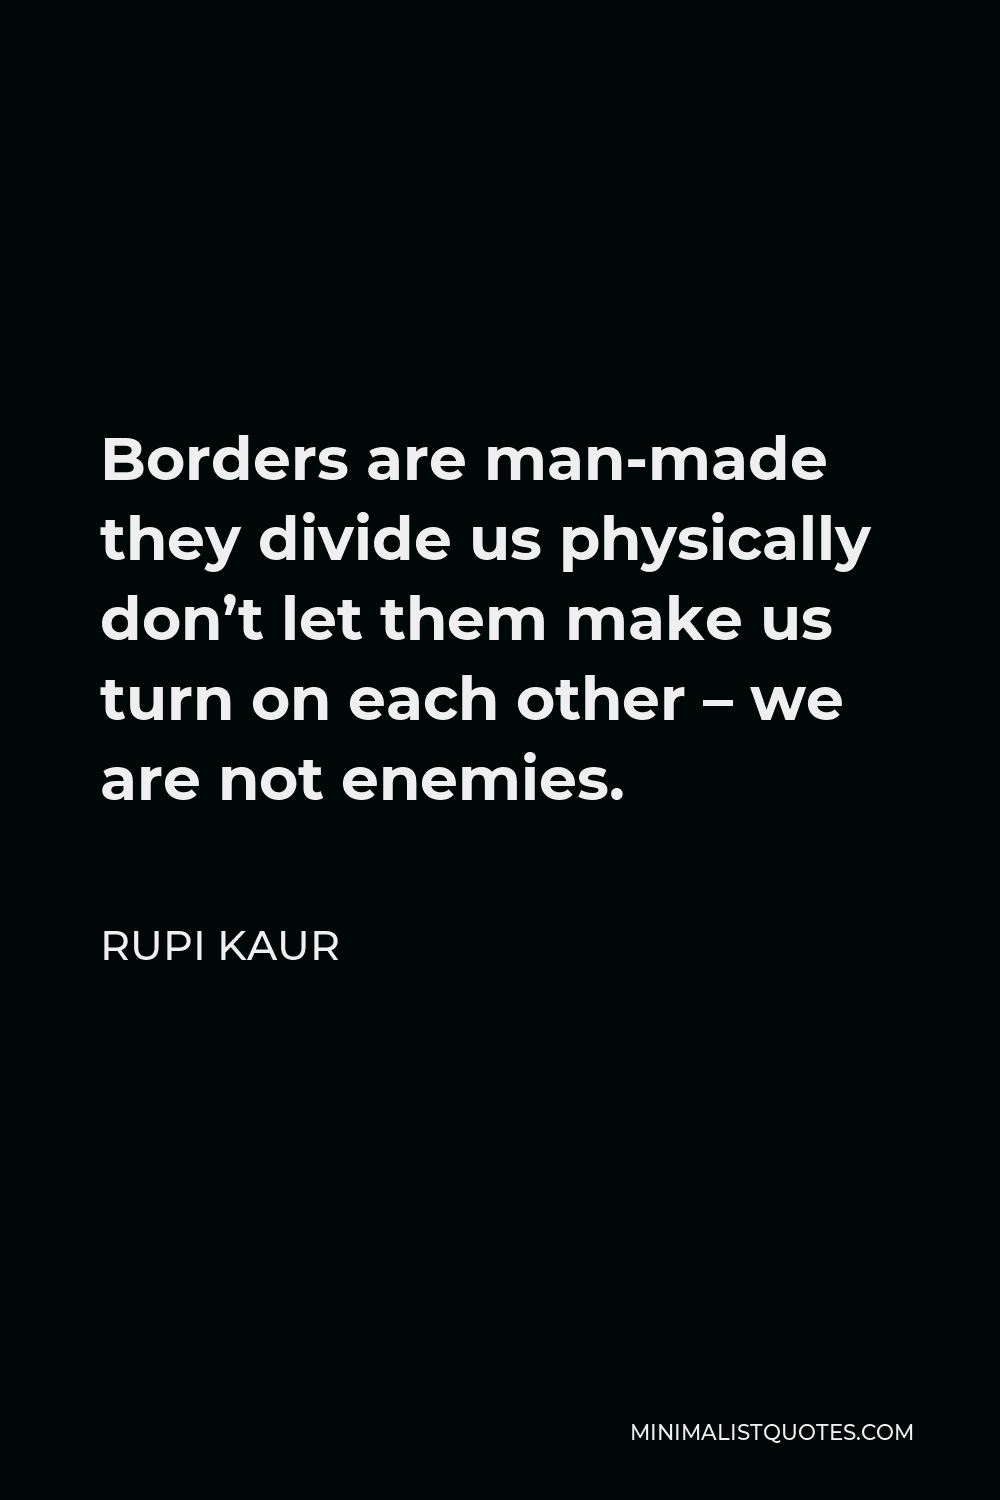 Rupi Kaur Quote - Borders are man-made they divide us physically don’t let them make us turn on each other – we are not enemies.